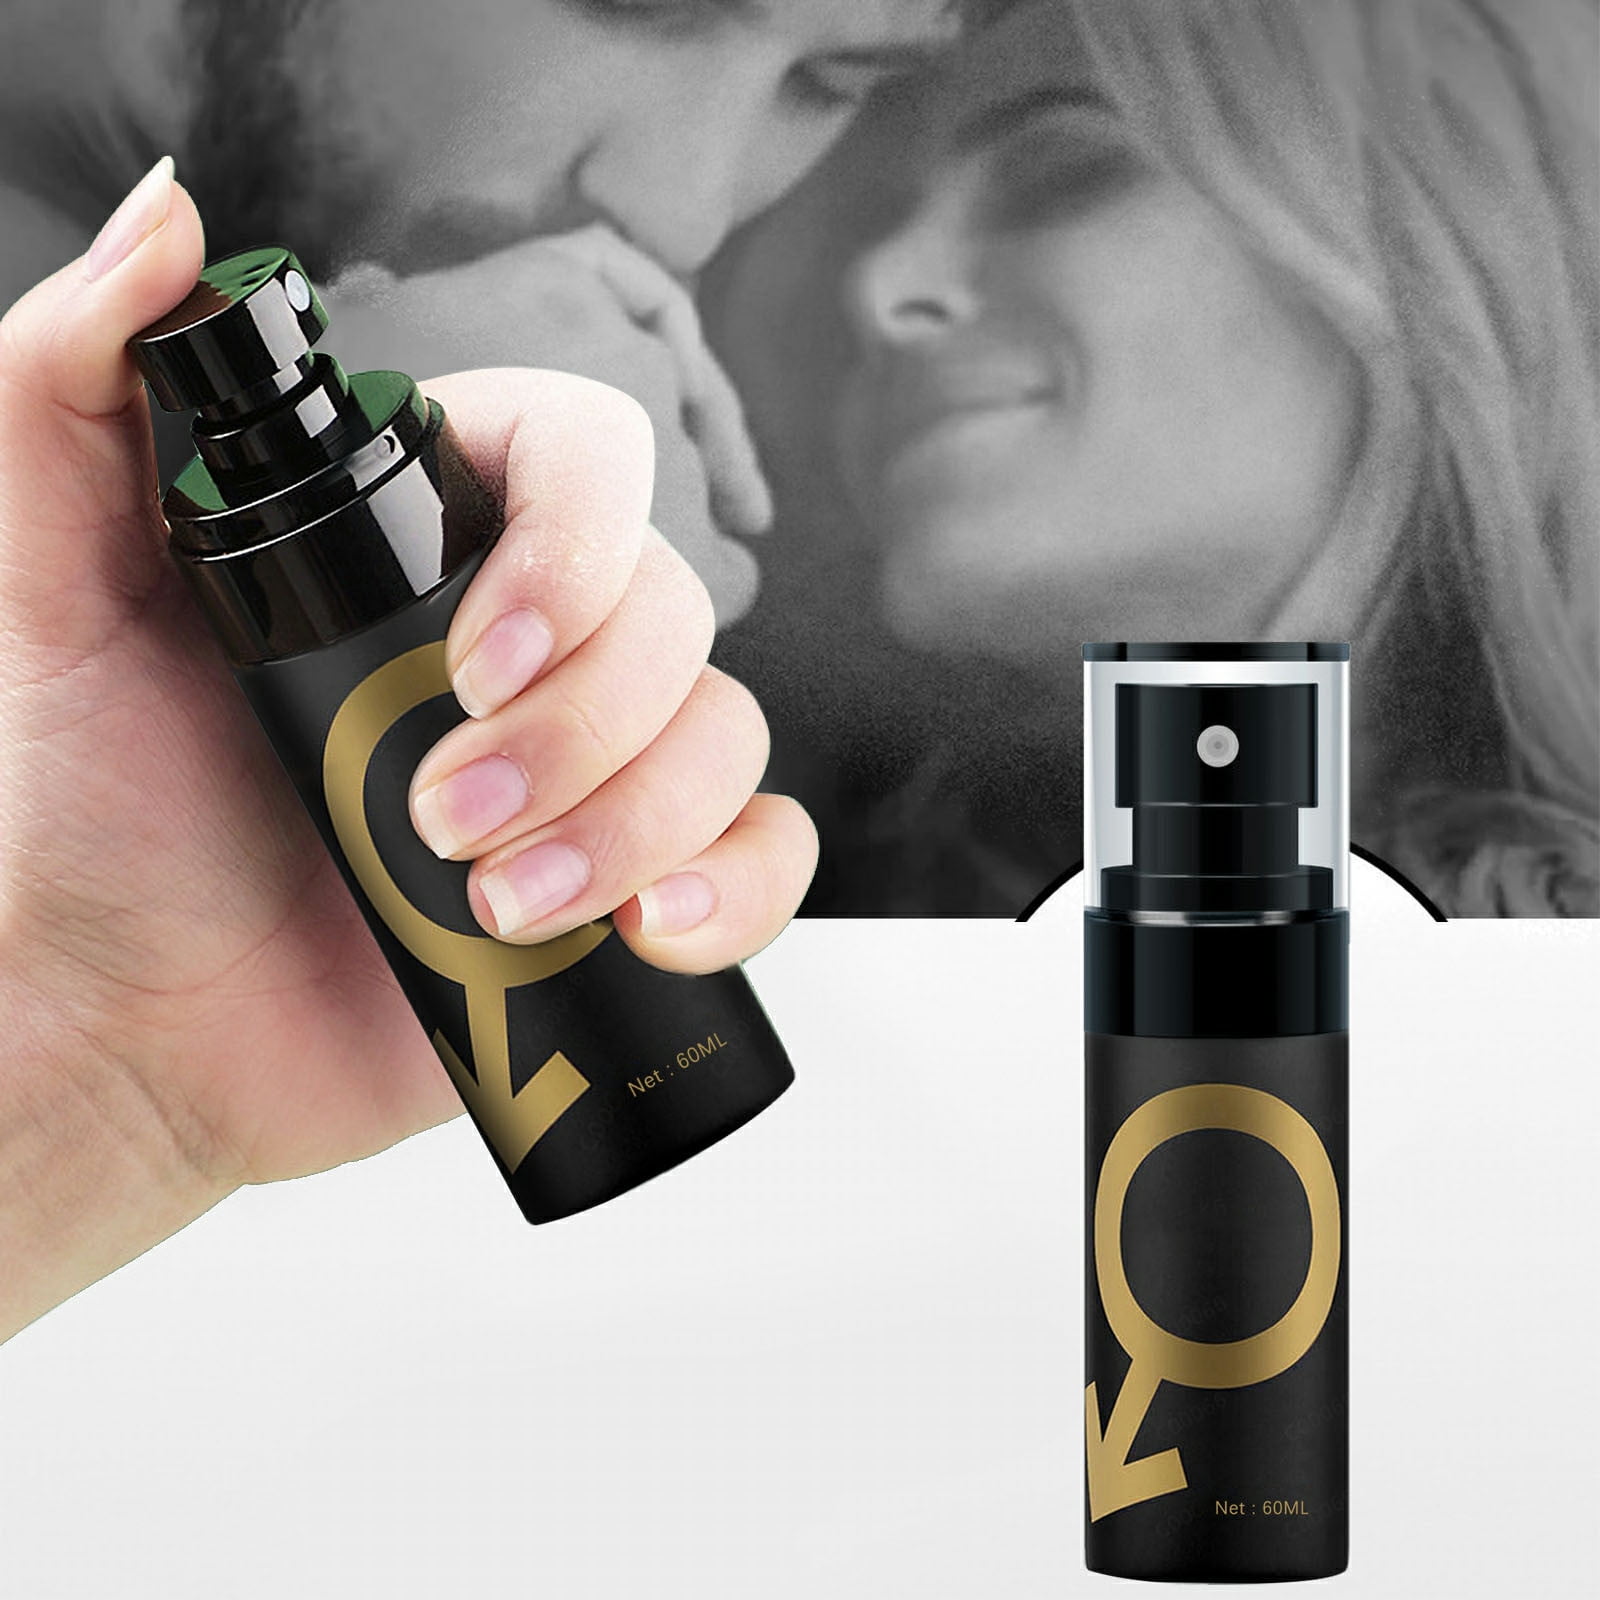 Realhomelove Perfume for Men, Golden Cologne for Men Attract Women